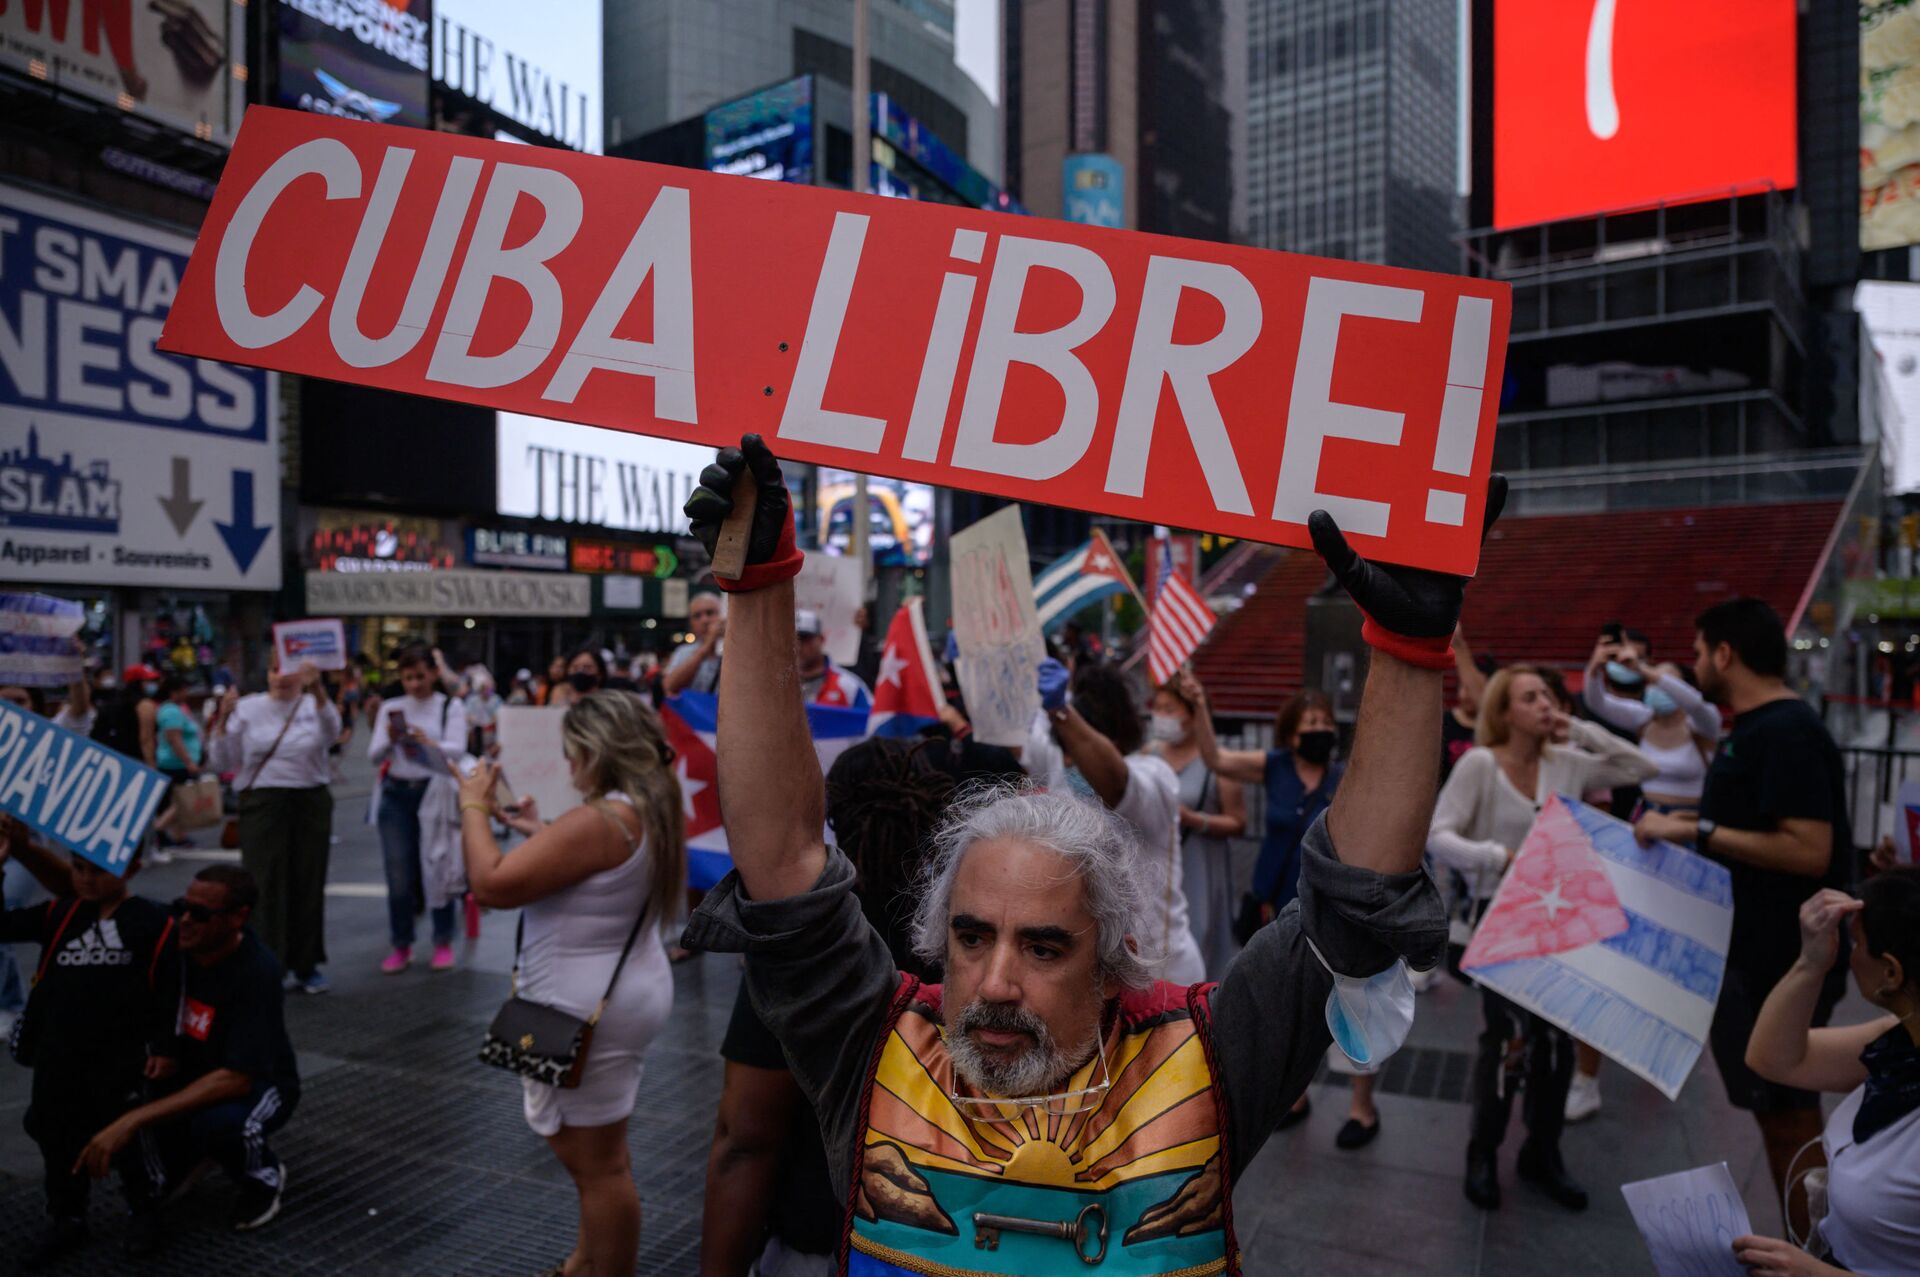 Demonstrators hold placards during a rally held in solidarity with anti-government protests in Cuba, in Times Square, New York on July 13, 2021. - One person died and more than 100 others, including independent journalists and dissidents, have been arrested after unprecedented anti-government protests in Cuba, with some remaining in custody on Tuesday, observers and activists said. - Sputnik International, 1920, 07.09.2021